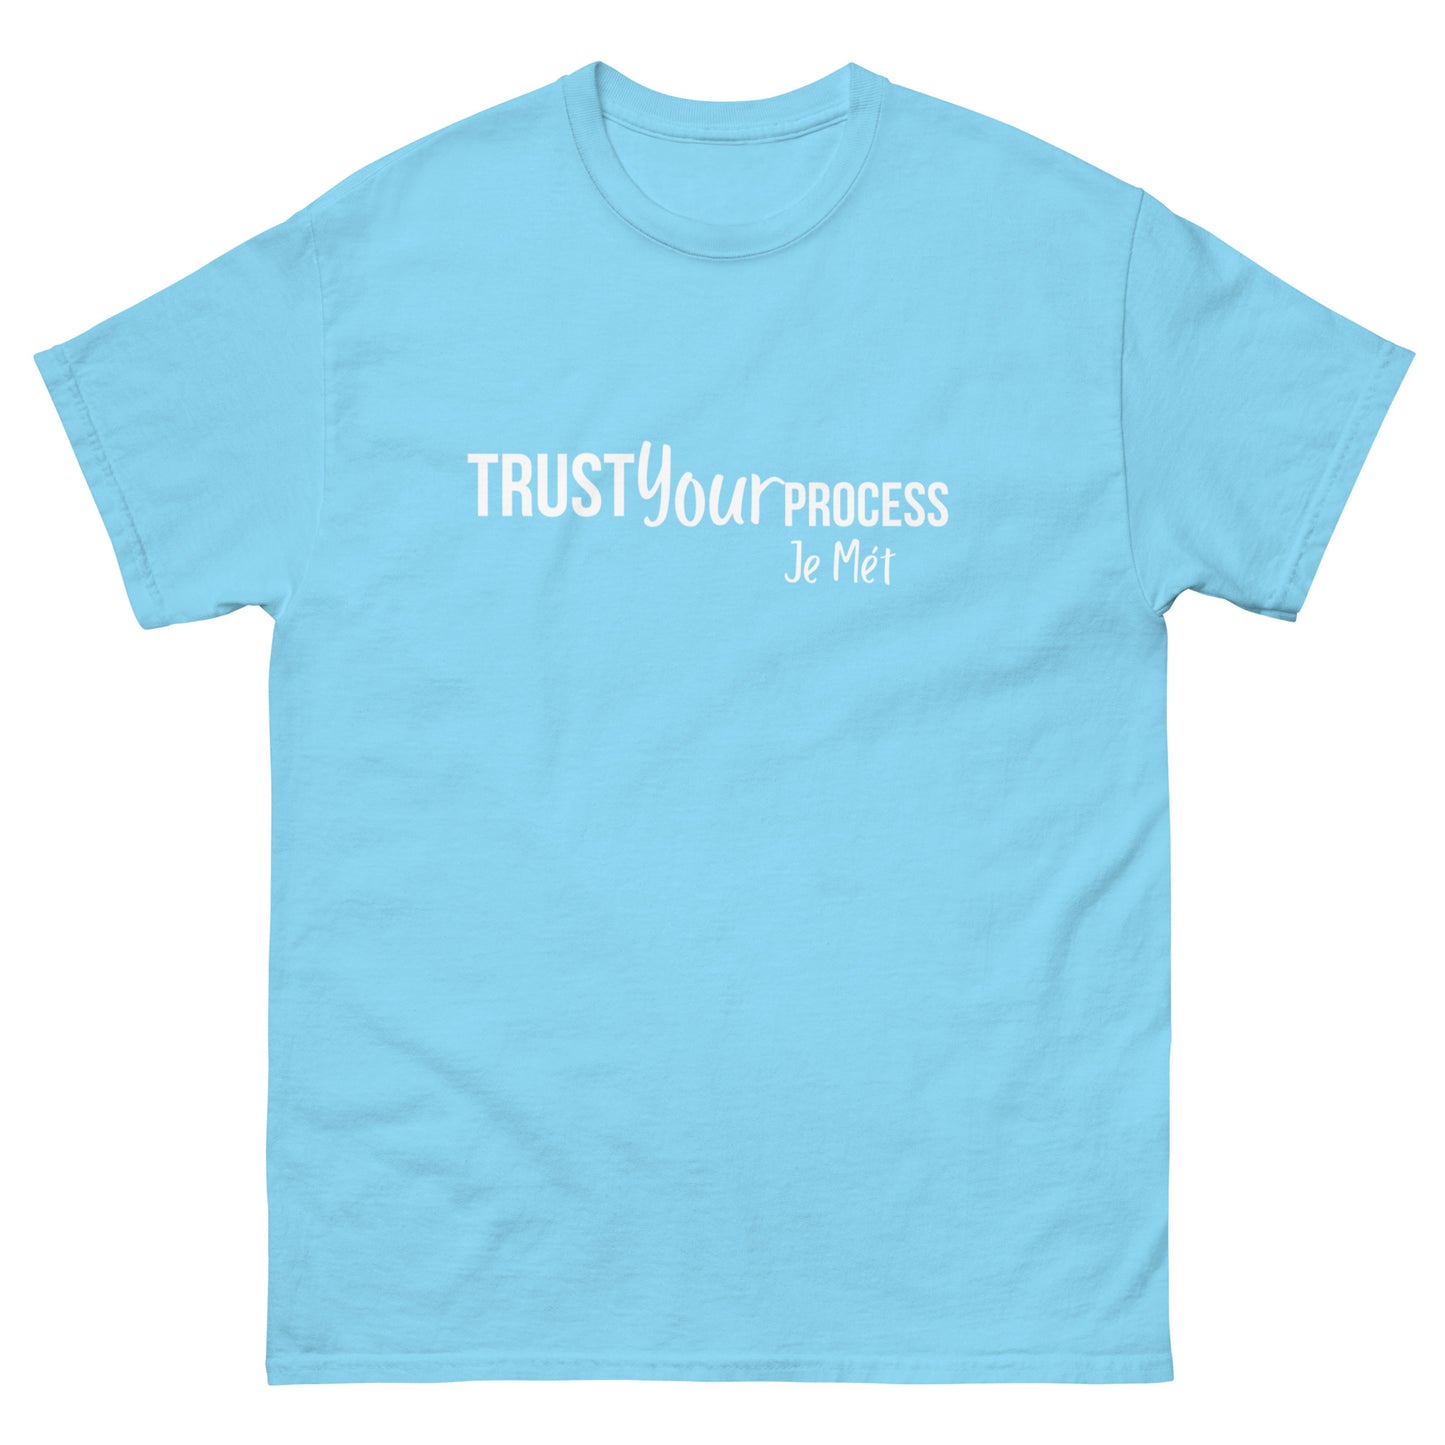 Trust your Process tee